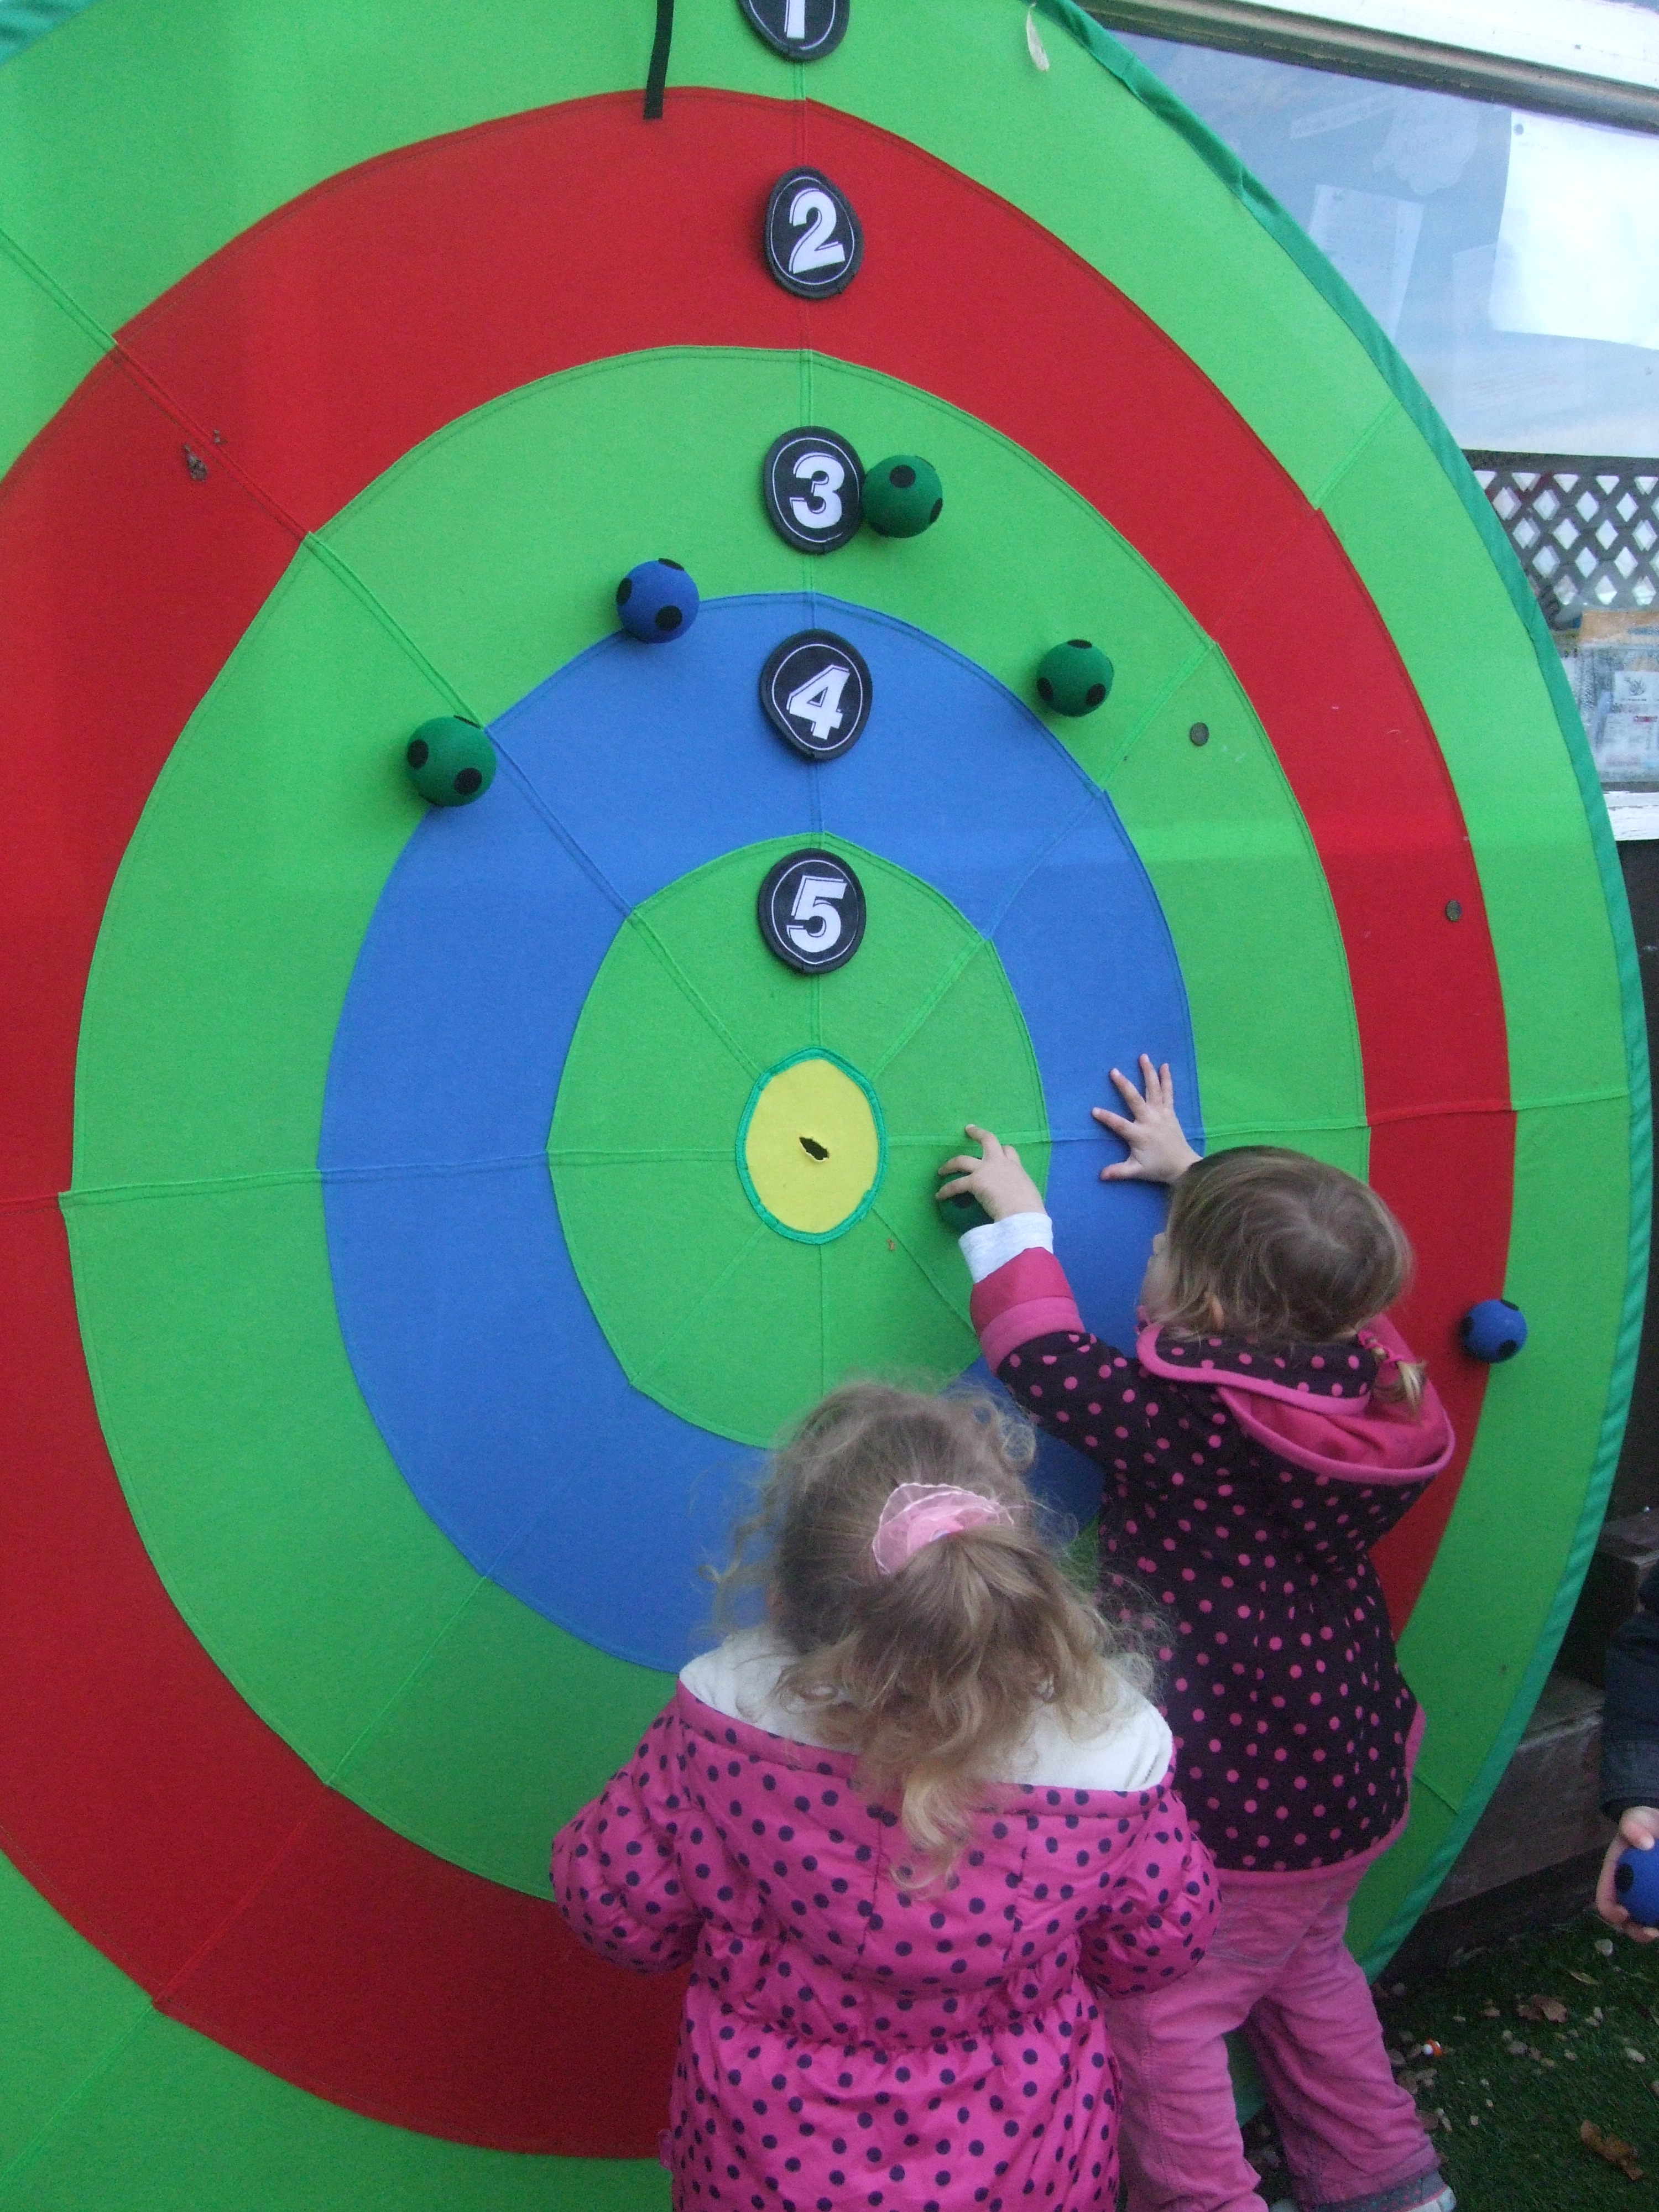 Making the most of our new resources thanks to Sainsbury's Active Kids!